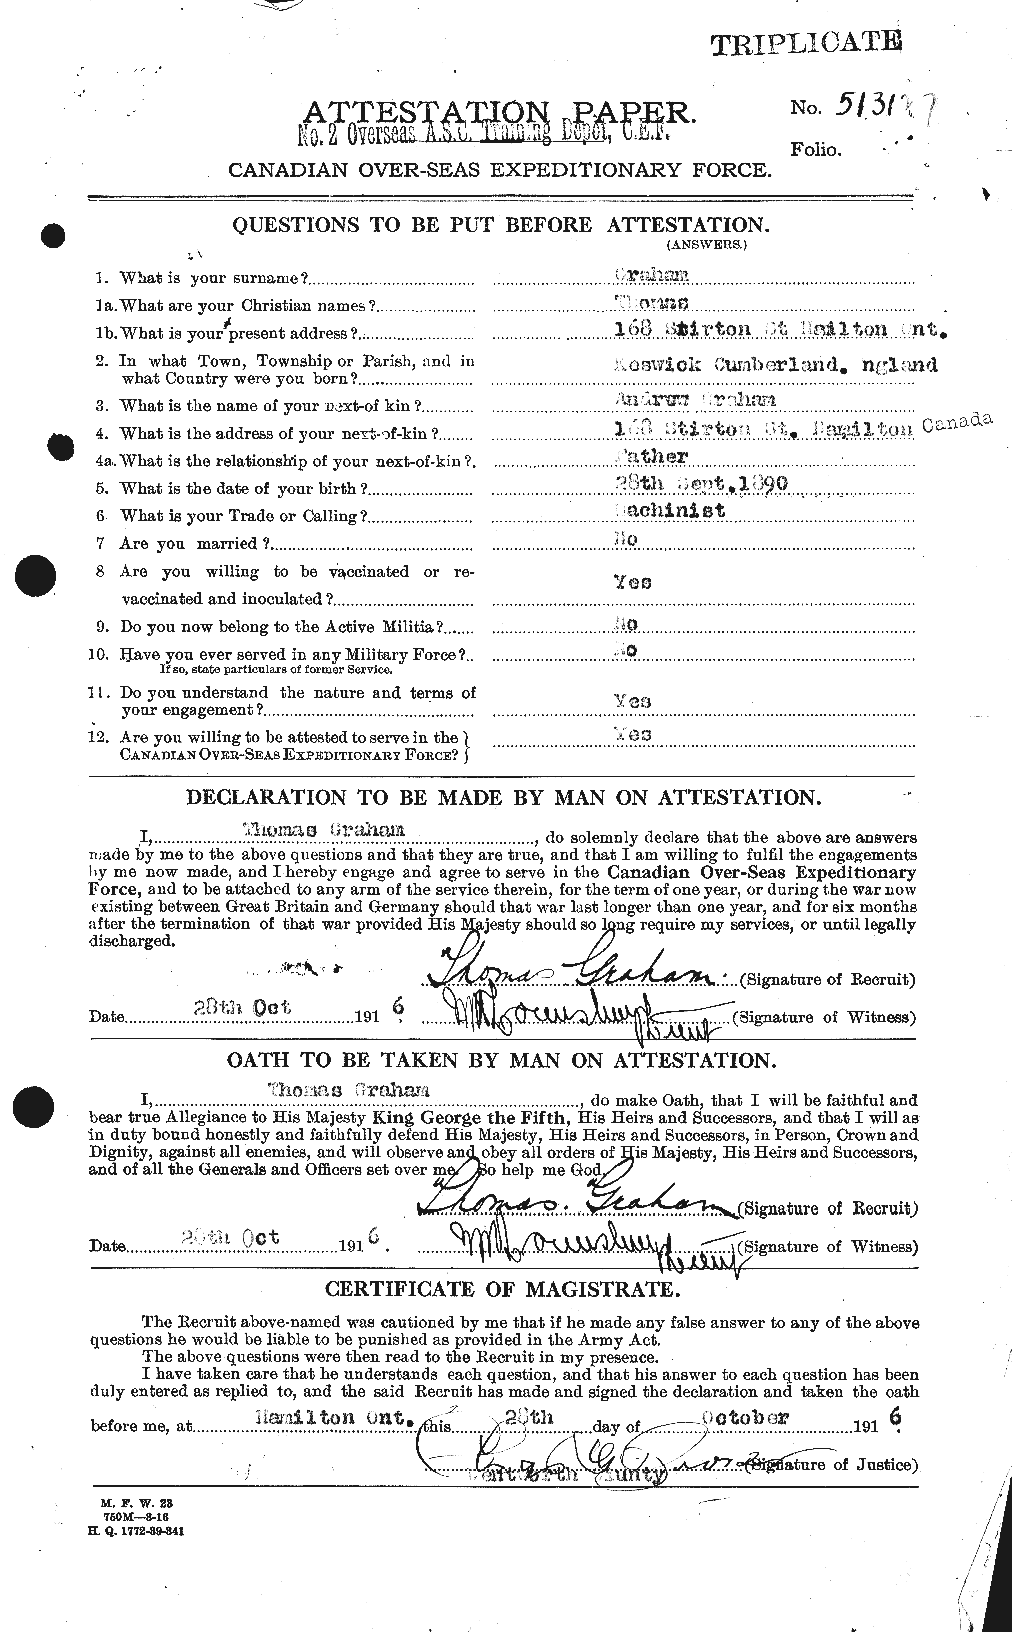 Personnel Records of the First World War - CEF 359487a